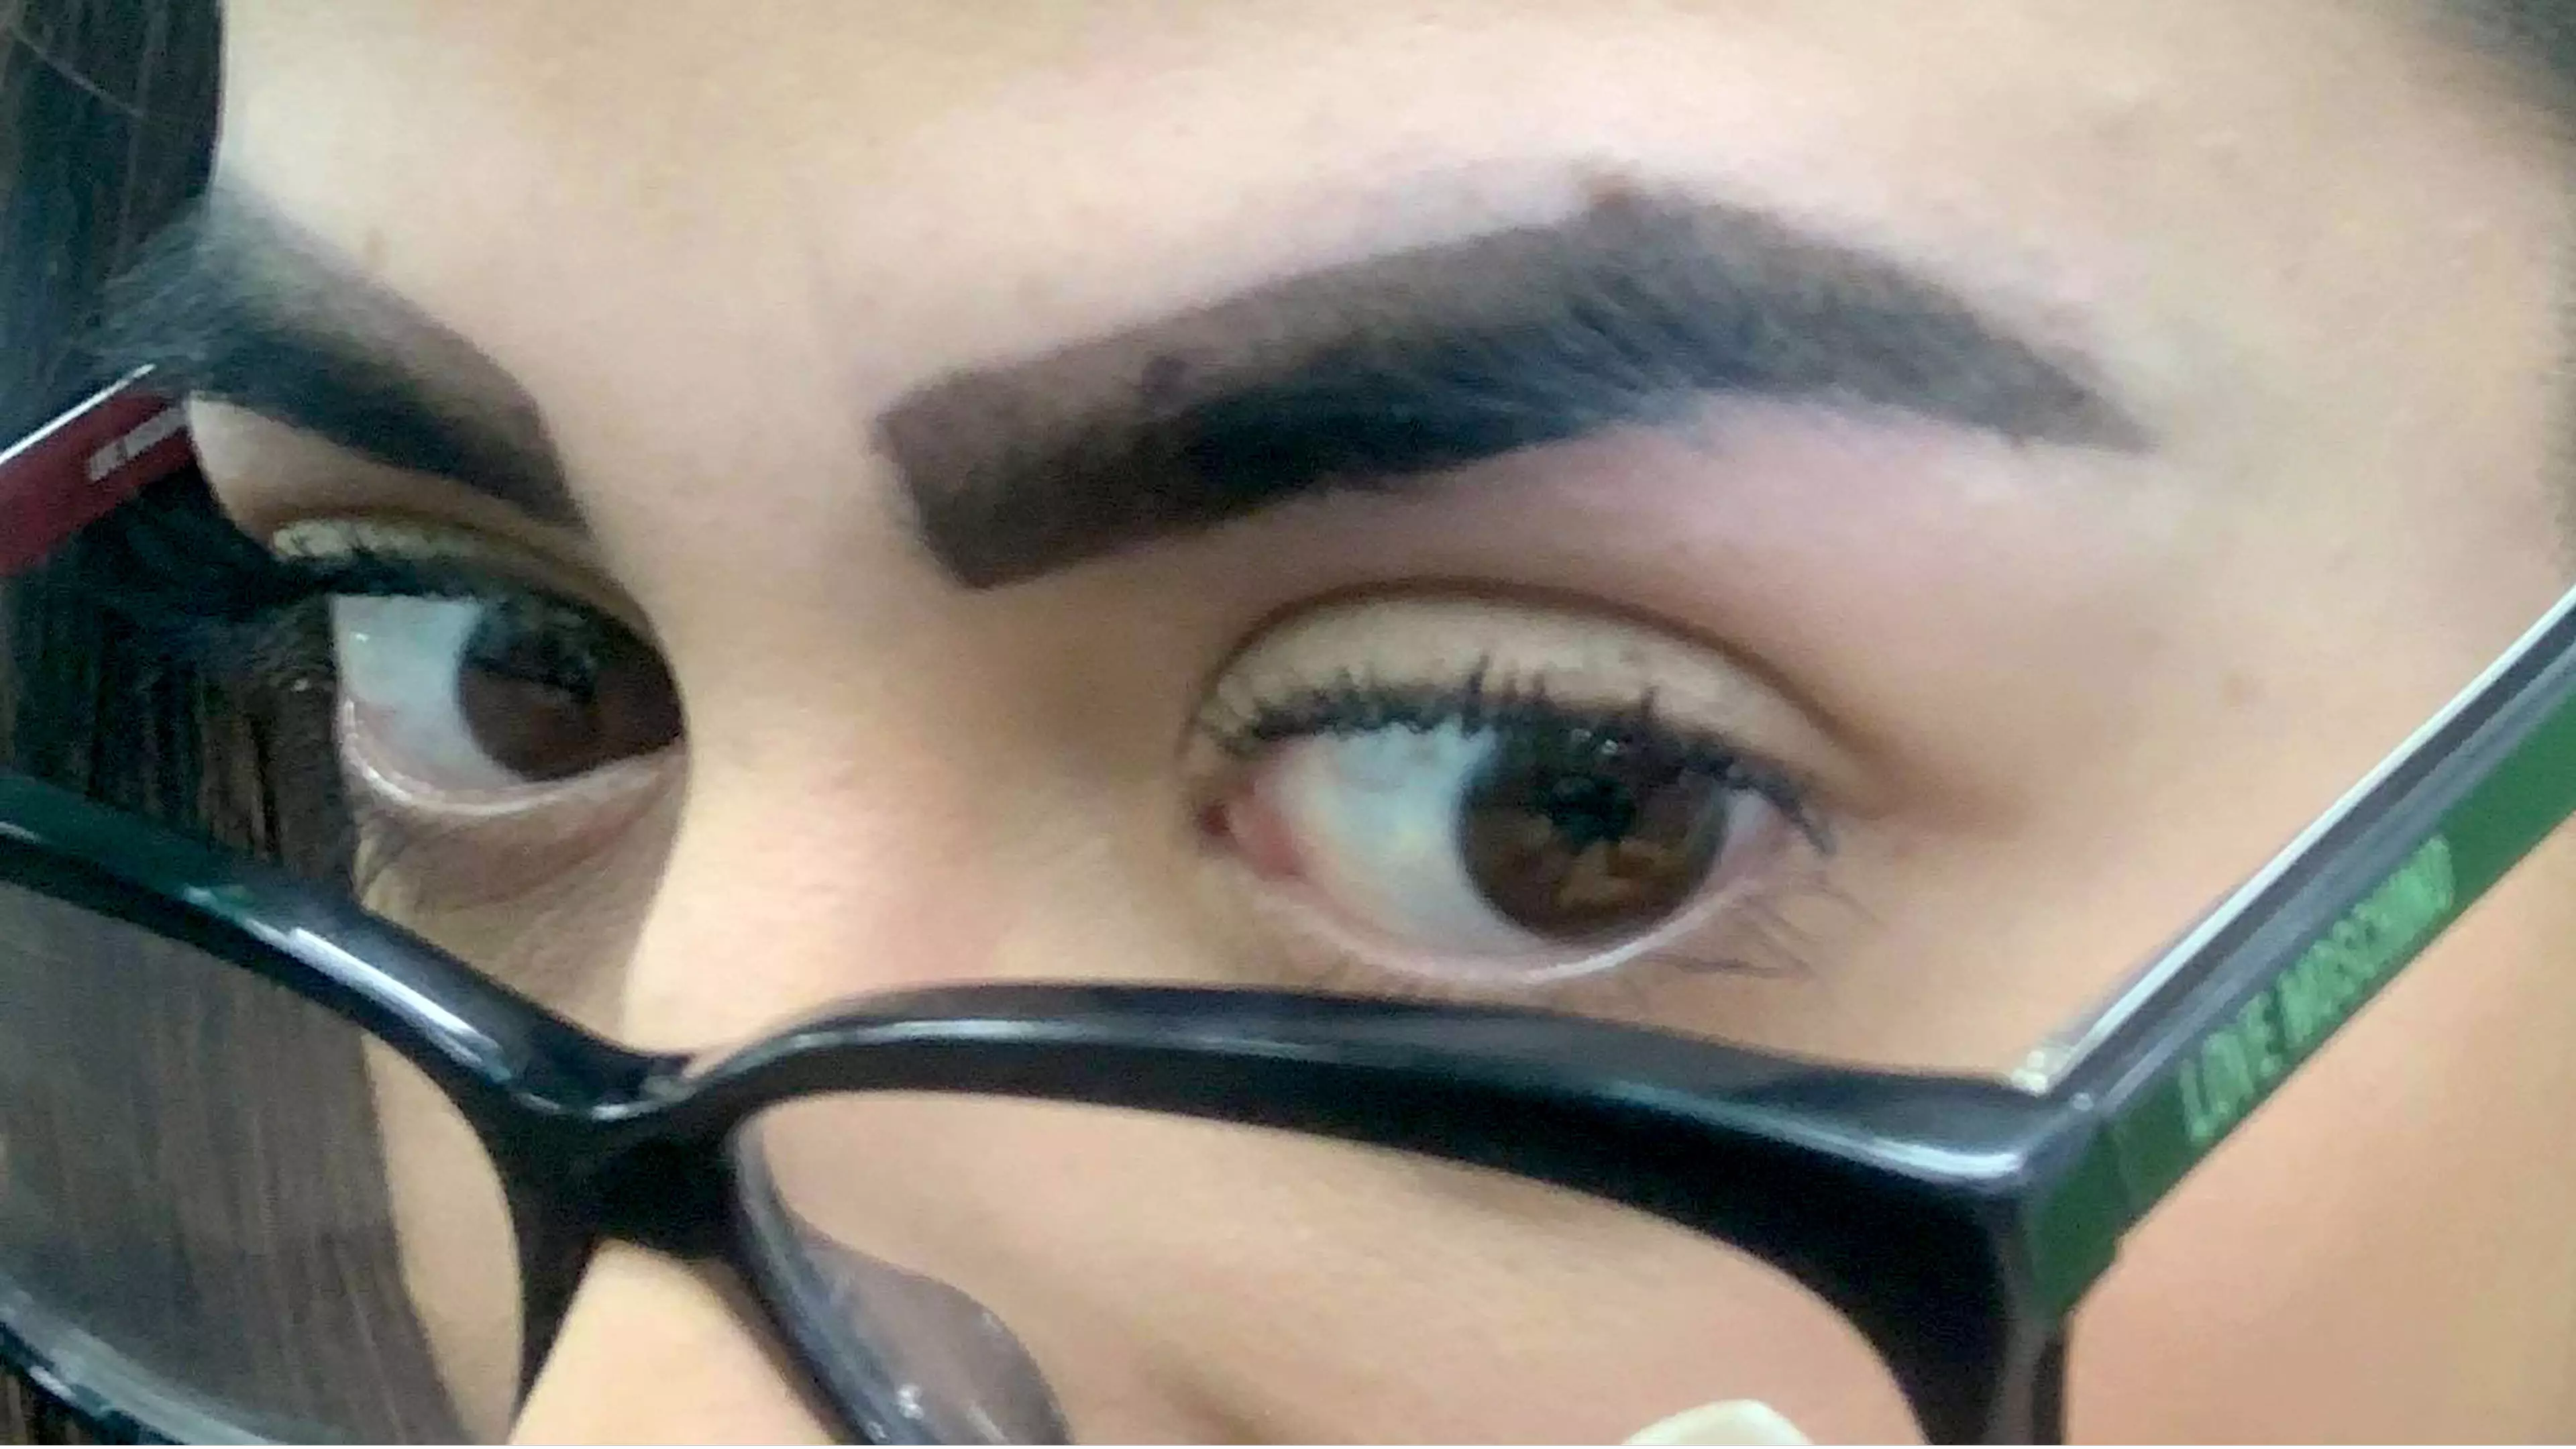 Woman Leaves Salon In Tears Over Botched Brow Treatment